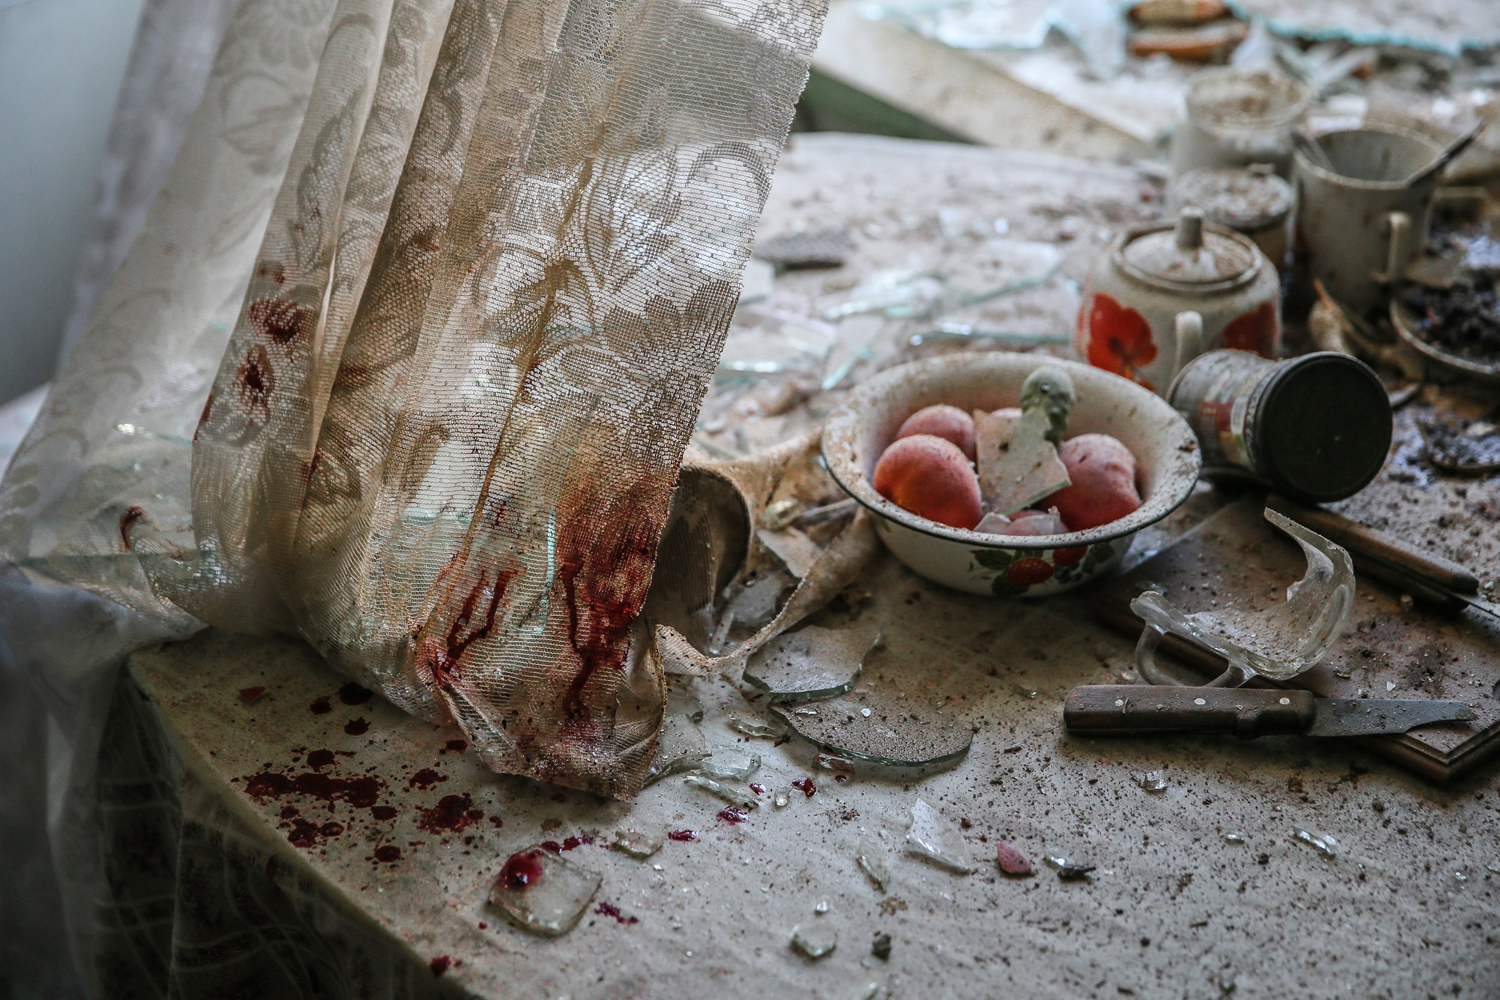 Aug. 26, 2014. Damaged goods lie in a damaged kitchen in downtown Donetsk, Ukraine. Ukraine said it had captured Russian soldiers engaged in combat on Ukrainian territory, a claim that could complicate efforts to end fighting between government forces and separatist rebels in the east of the country.